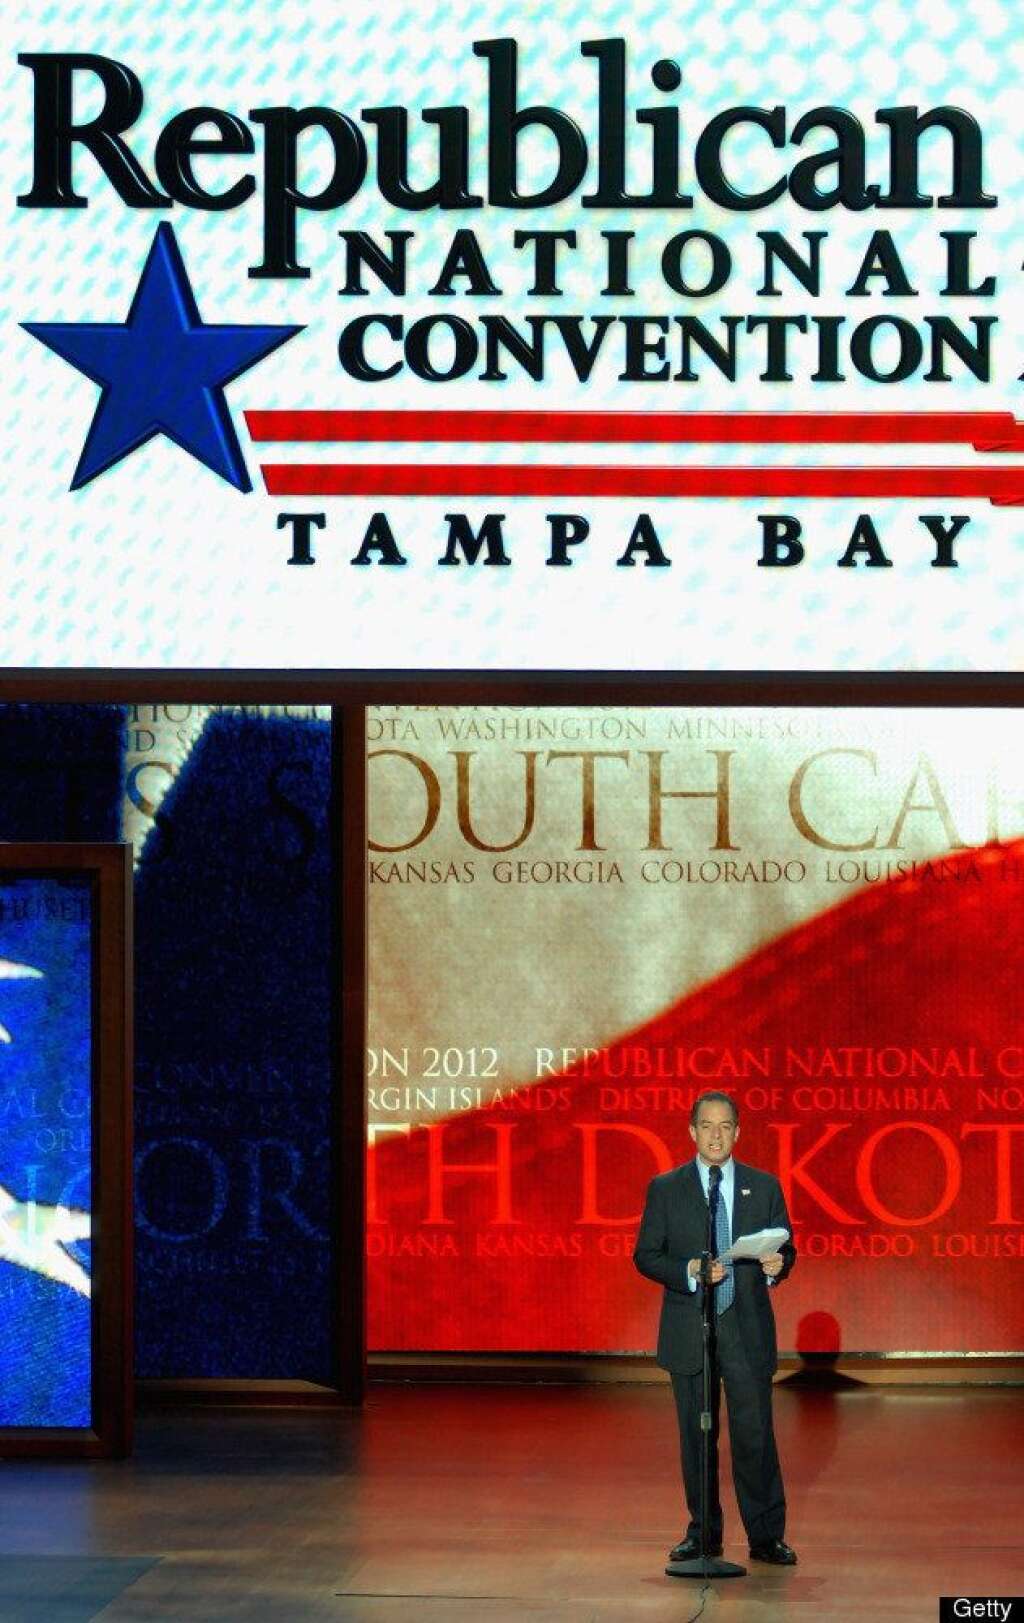 GOP Previews Site Of Republican National Convention - TAMPA, FL - AUGUST 20:  Republican National Committee Chairman Reince Priebus unveils the stage inside of the Tampa Bay Times Forum in preparation for the Republican National Convention on August 20, 2012 in Tampa, Florida. Thousands will decend on Tampa for the four day convention which takes place August 27-30.  (Photo by Tim Boyles/Getty Images)